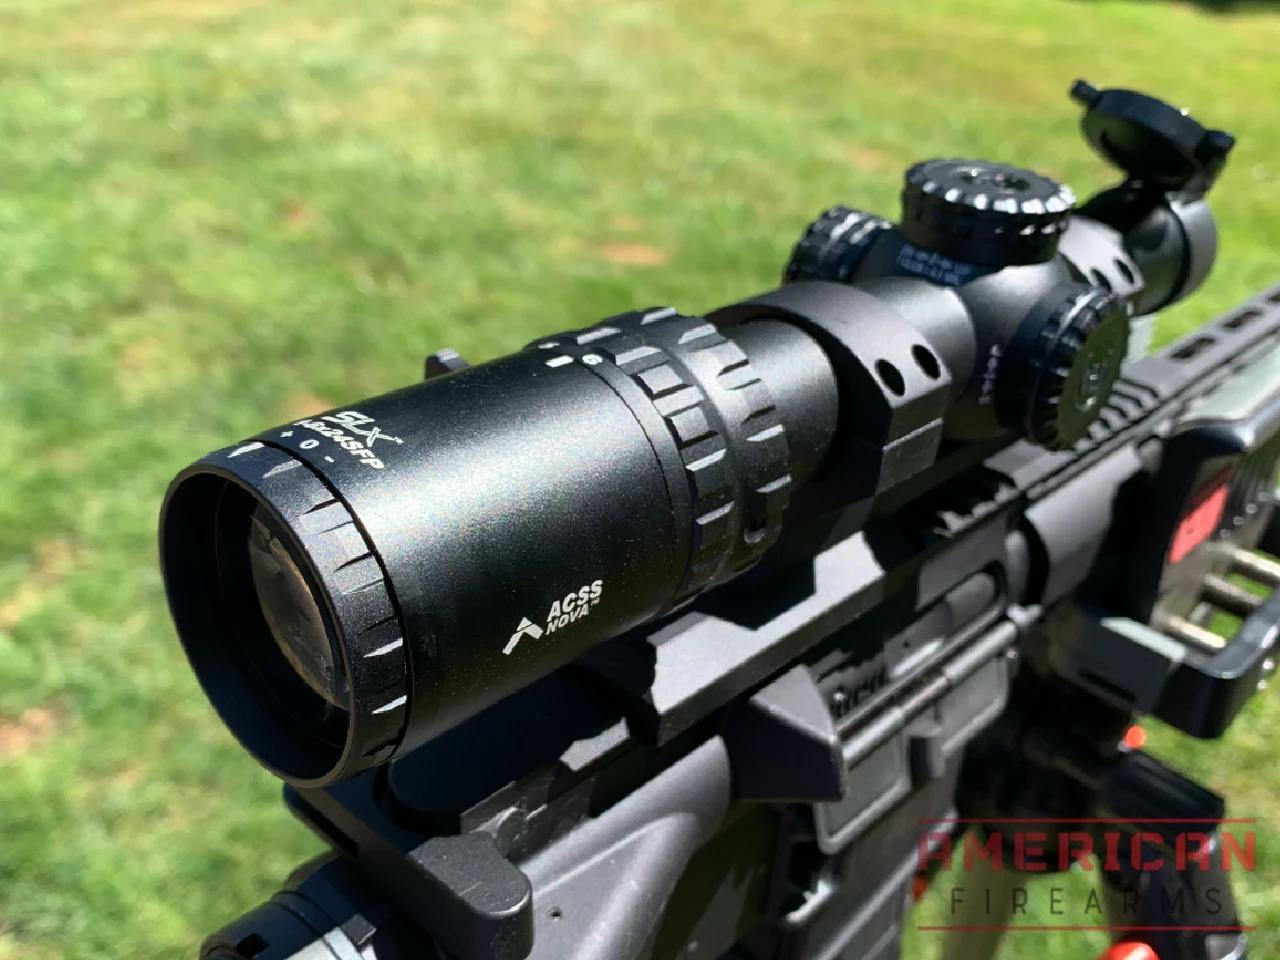 Best LPVO Riflescopes of 2023, Tested and Reviewed